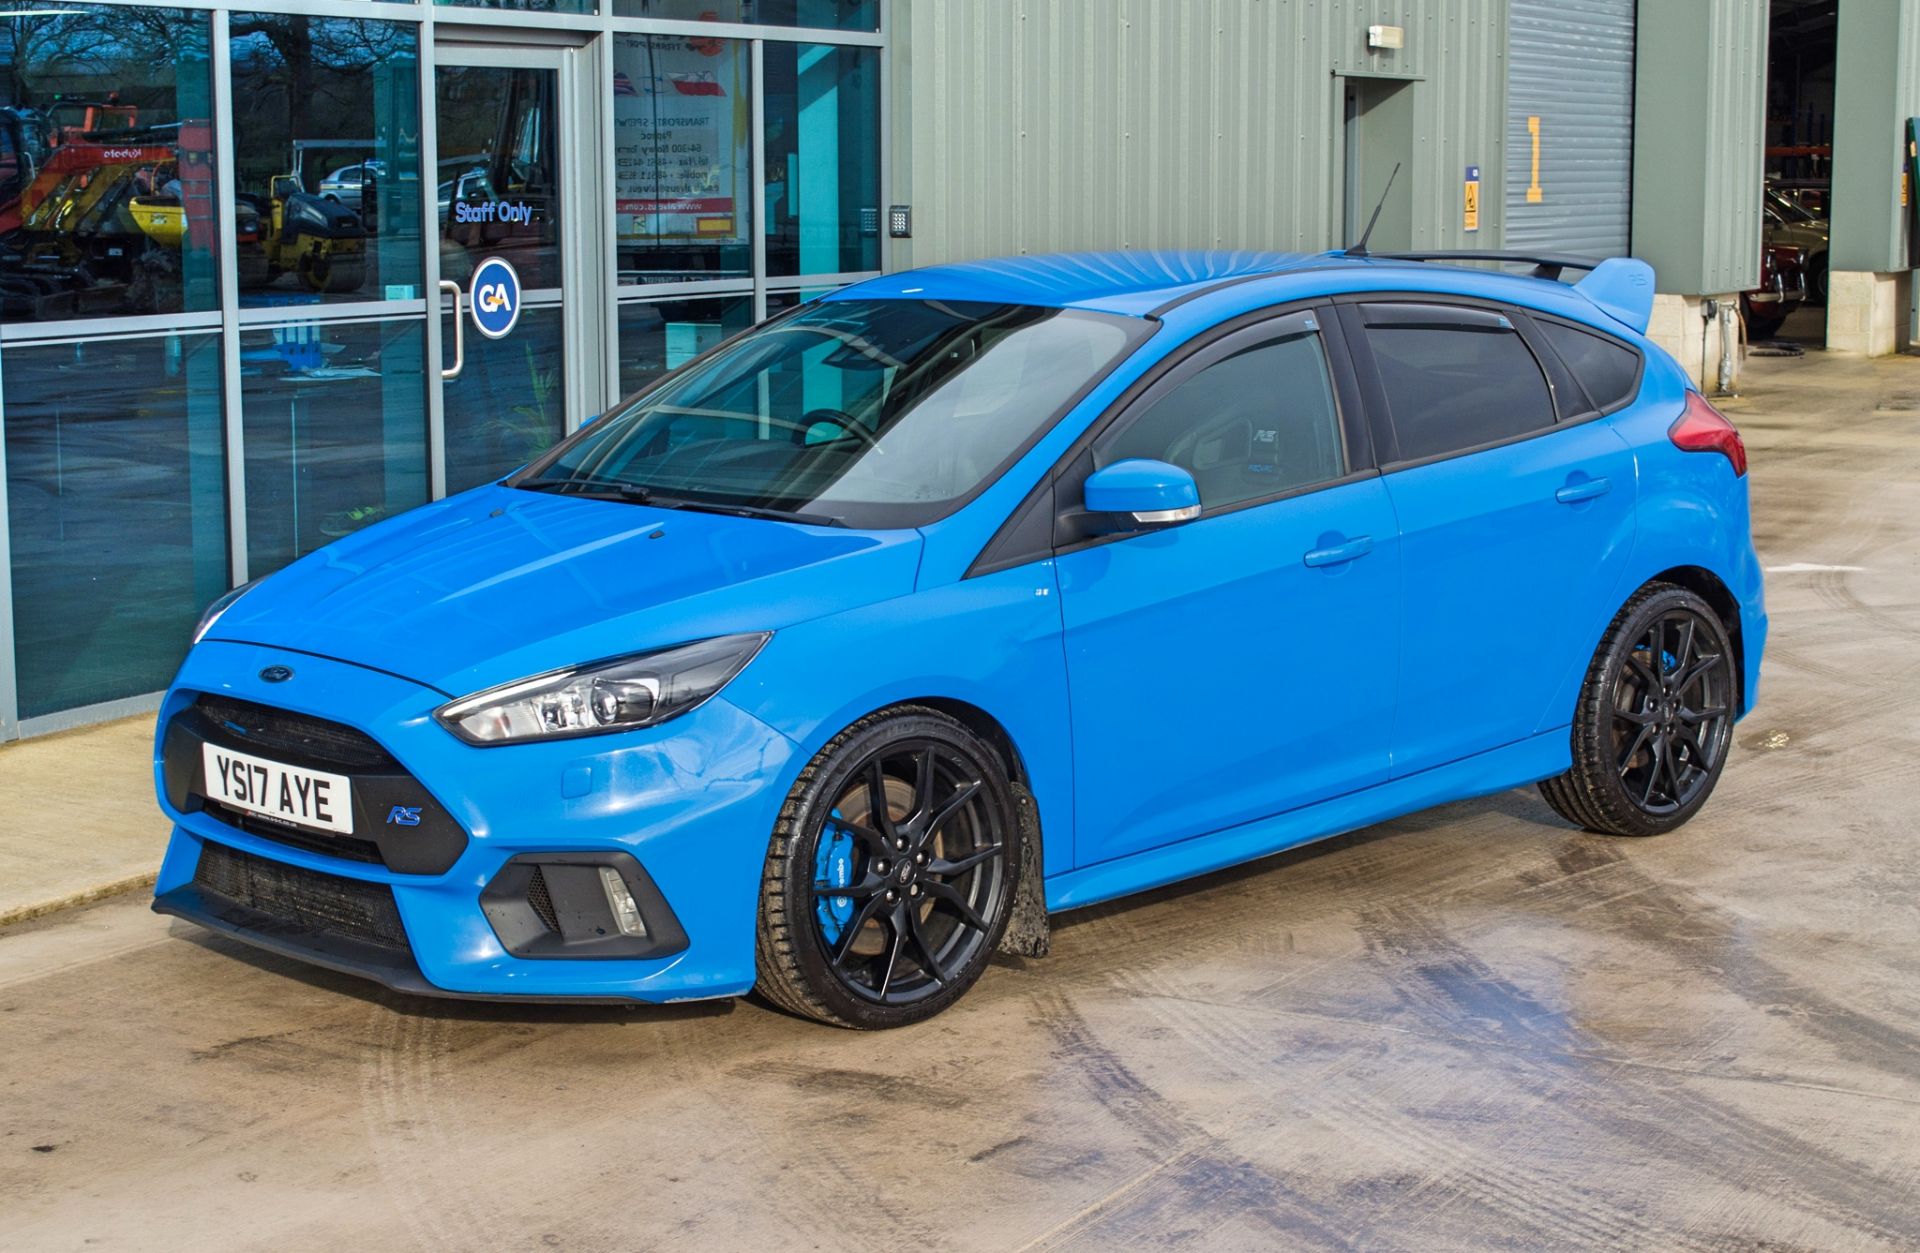 2017 Ford Focus 2.3 RS 5 door hatch back - Image 4 of 56